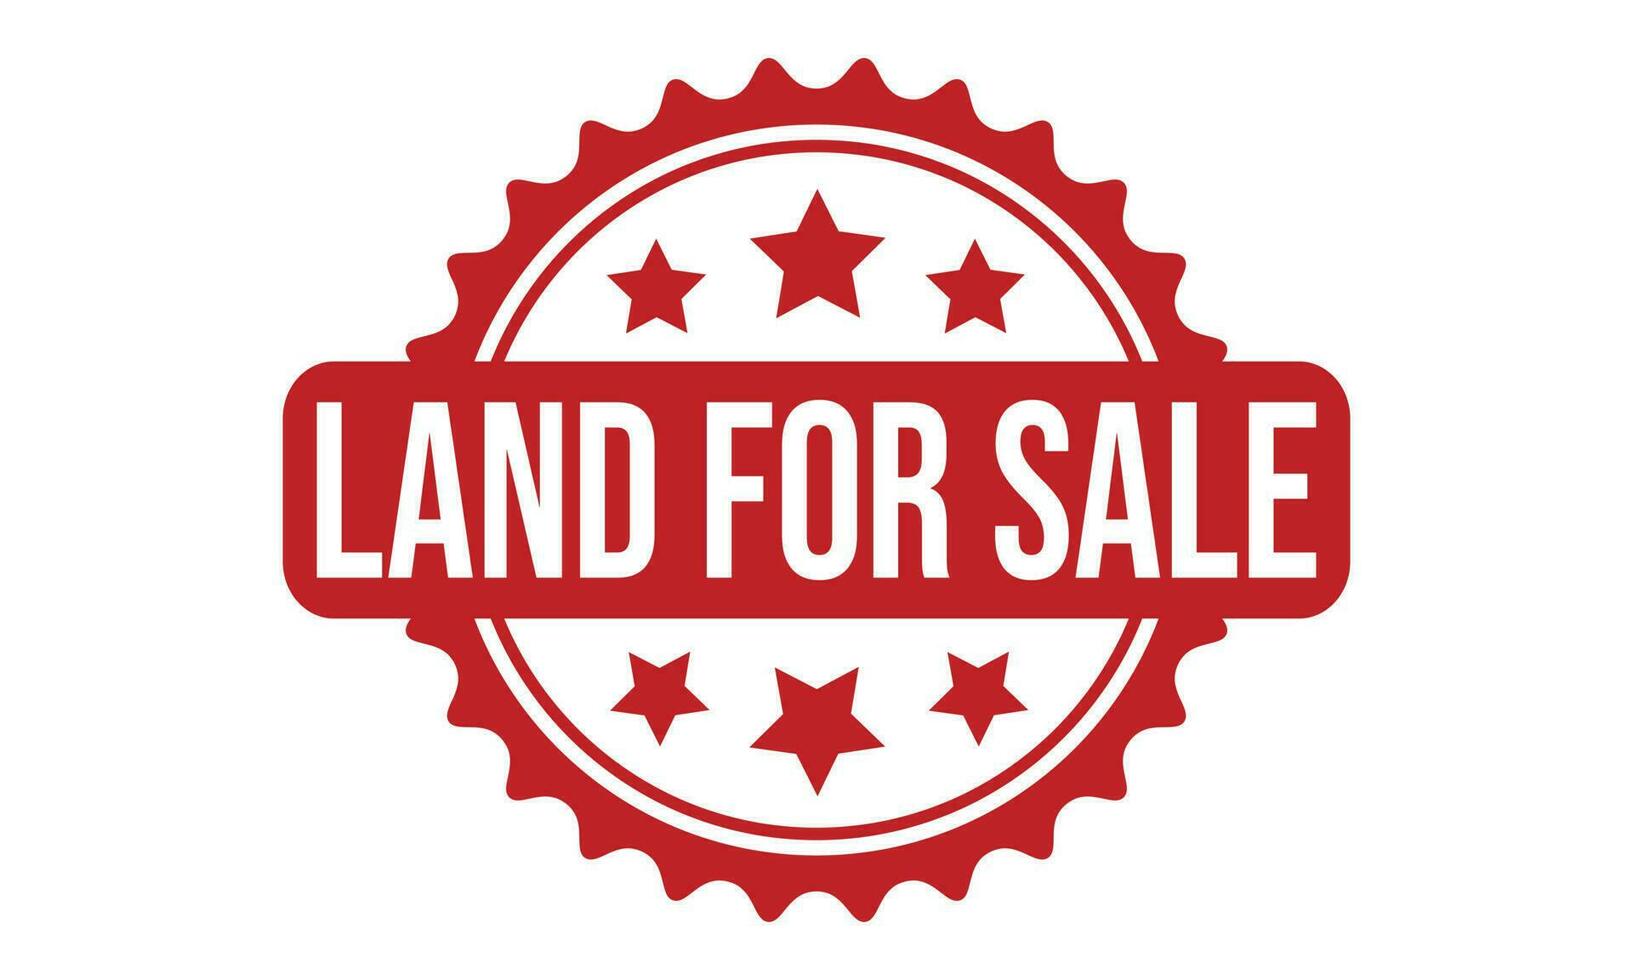 Land For Sale Rubber Stamp Seal Vector